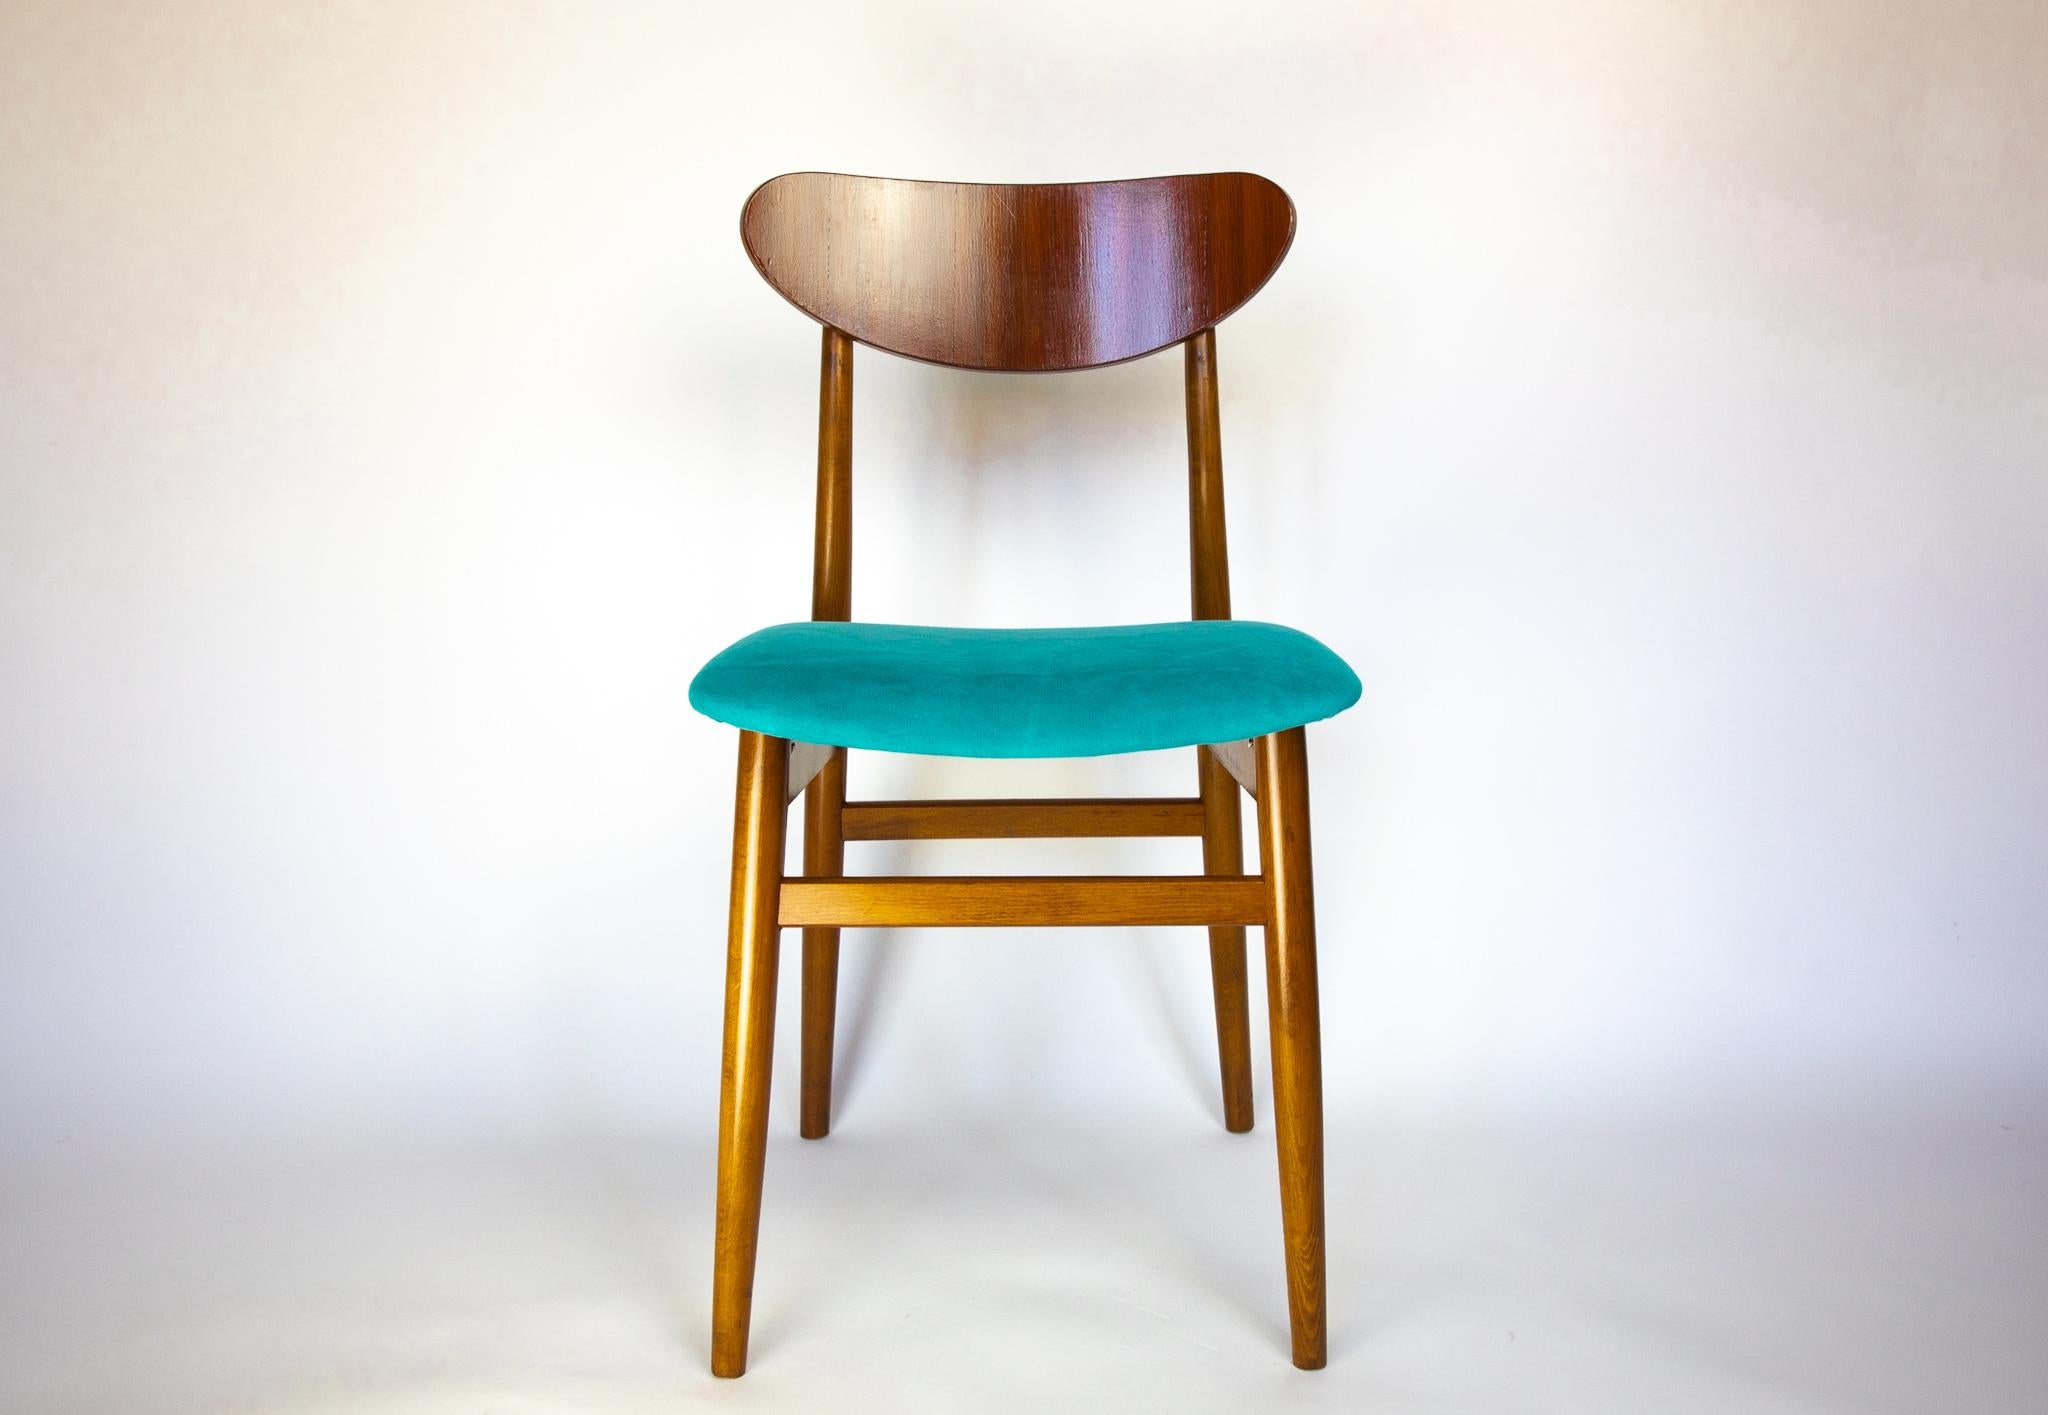 Italian Mid Century Modern Dining Chairs with Blue Velvet Upholstery, Set of 6, 1950s For Sale